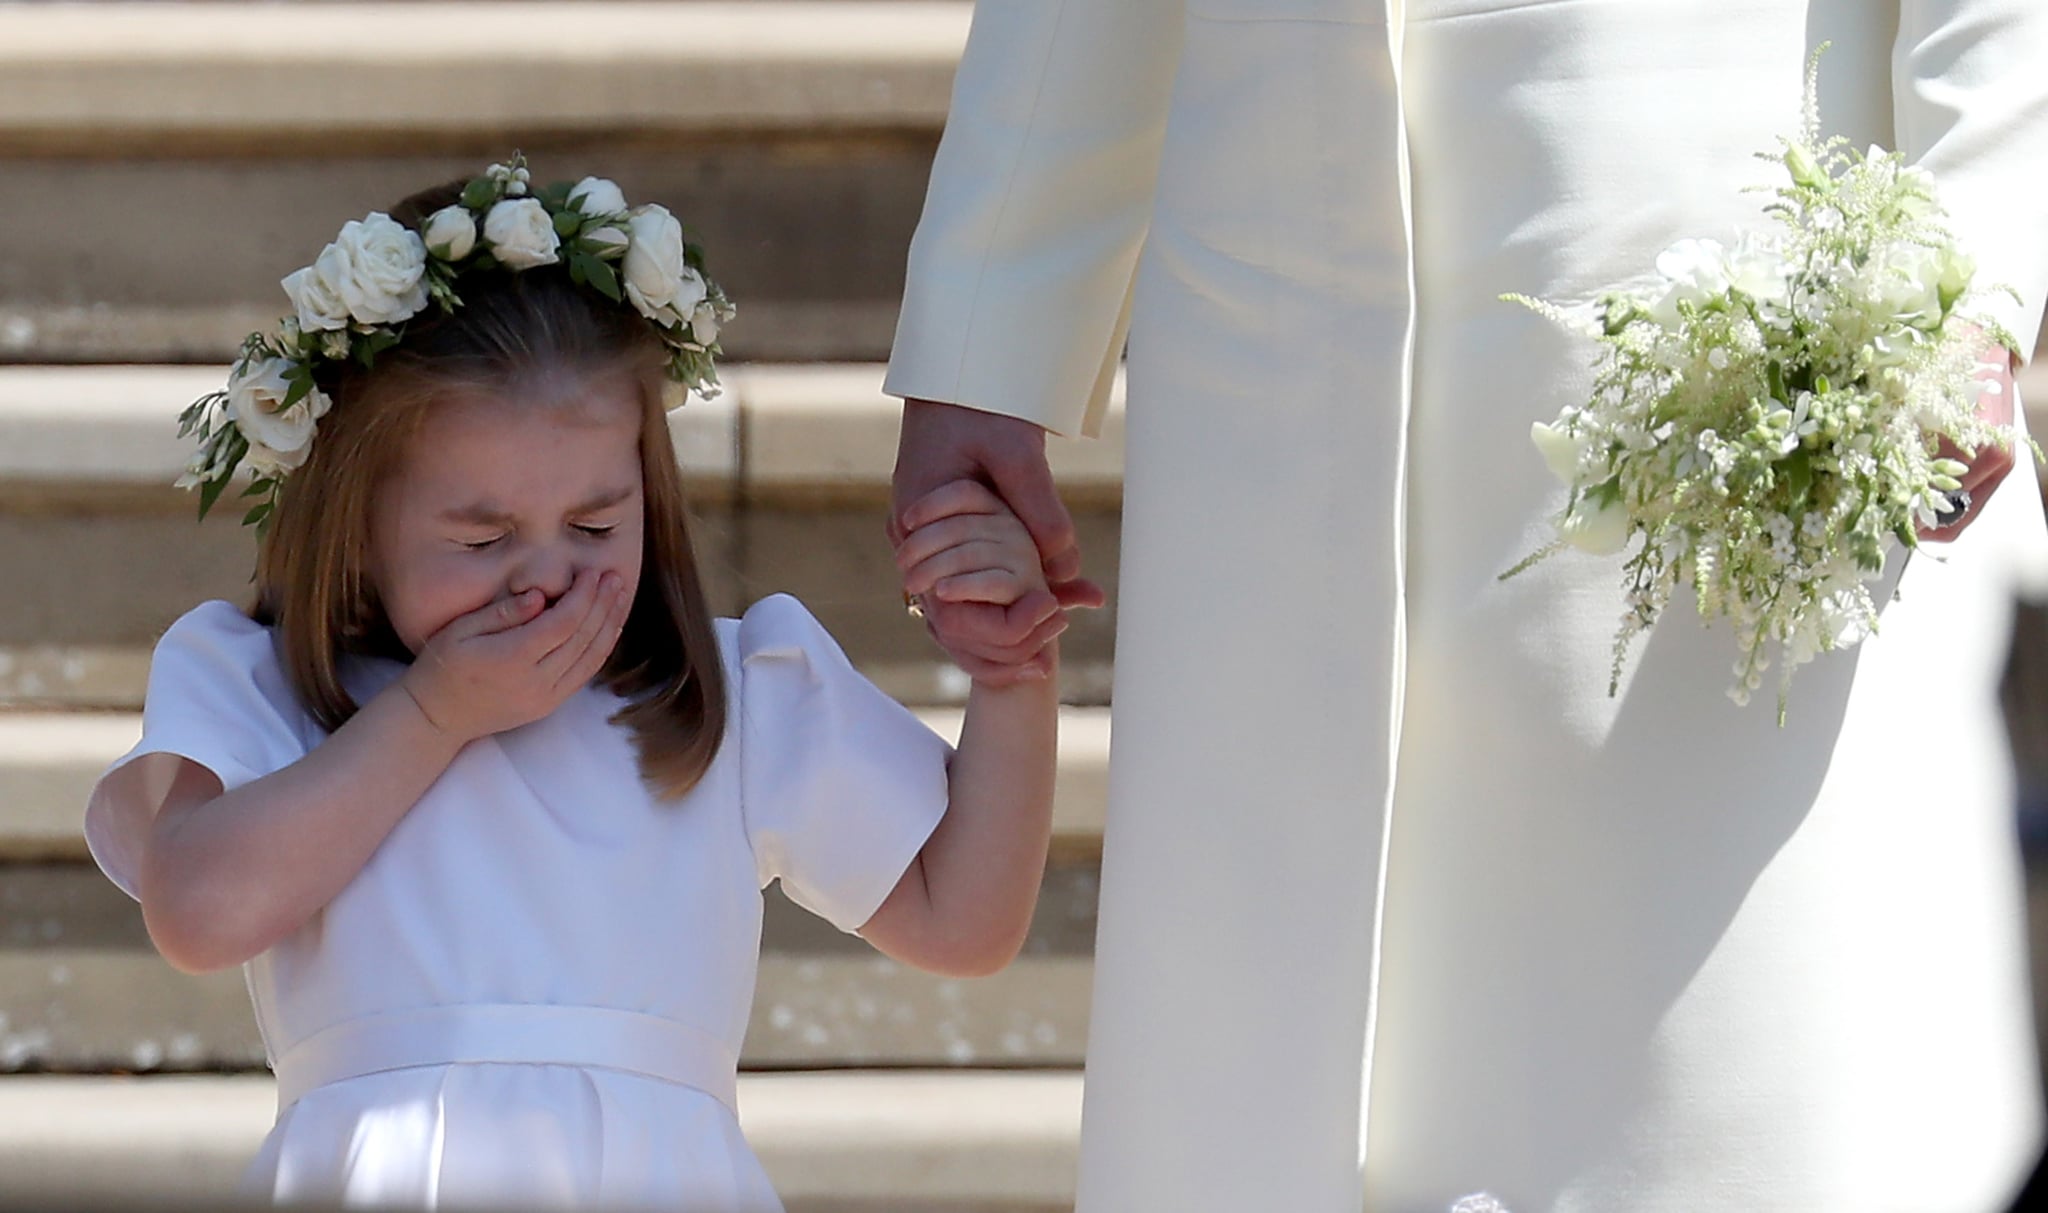 WINDSOR, UNITED KINGDOM - MAY 19:  Princess Charlotte of Cambridge stands on the steps with her mother Catherine, Duchess of Cambridge after the wedding of Prince Harry and Ms. Meghan Markle at St George's Chapel at Windsor Castle on May 19, 2018 in Windsor, England. (Photo by Jane Barlow - WPA Pool/Getty Images)